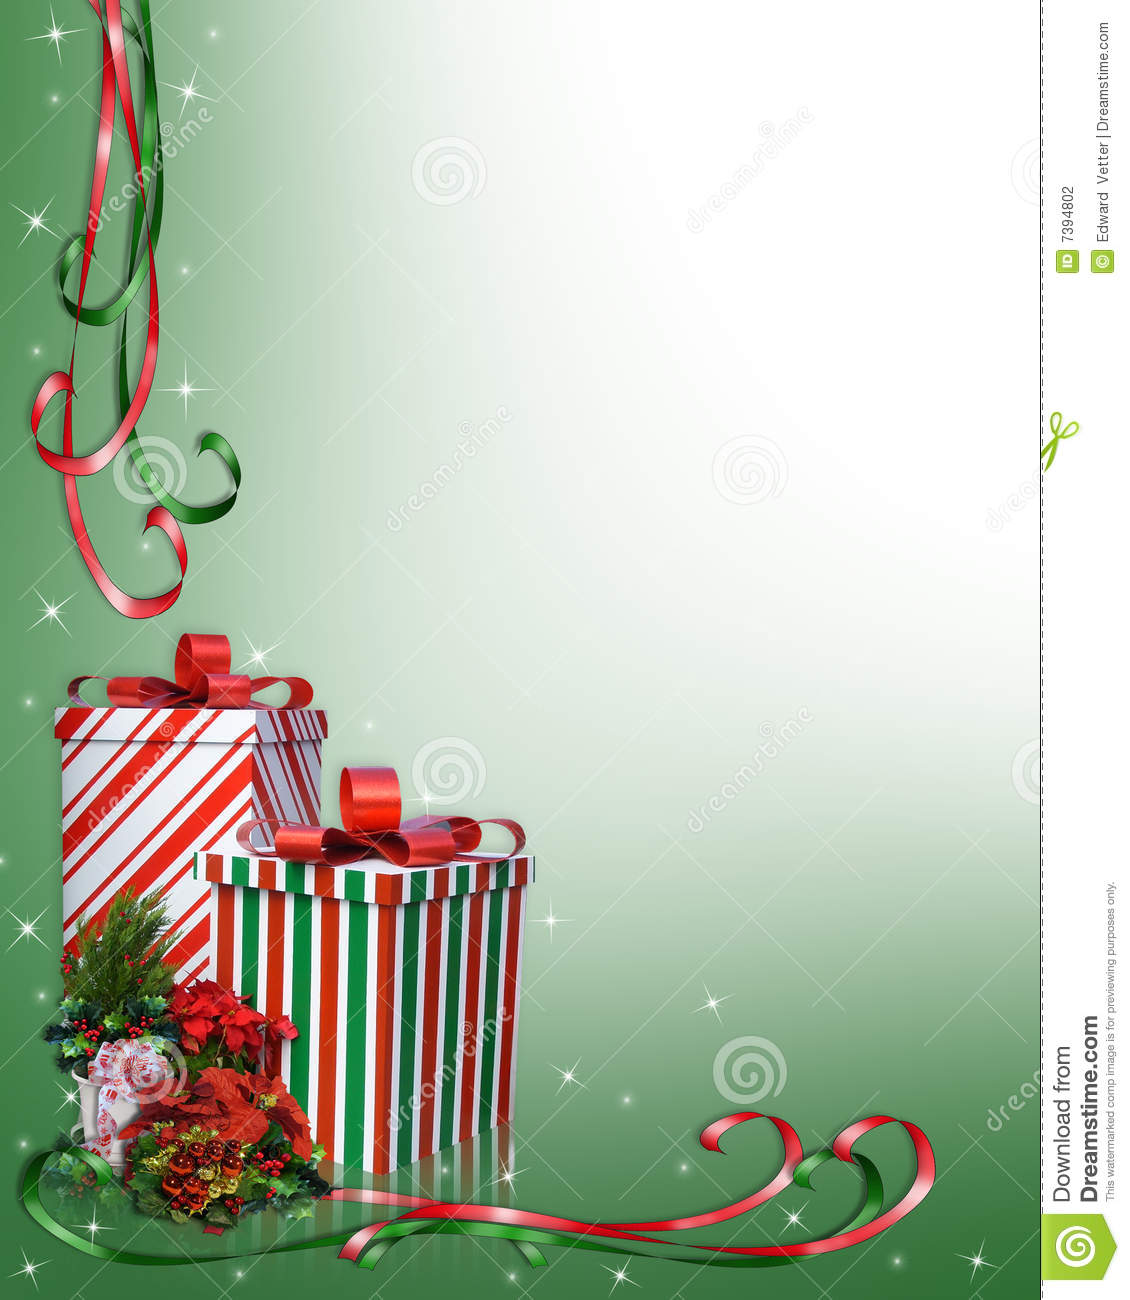 Christmas Present Border Free download on ClipArtMag